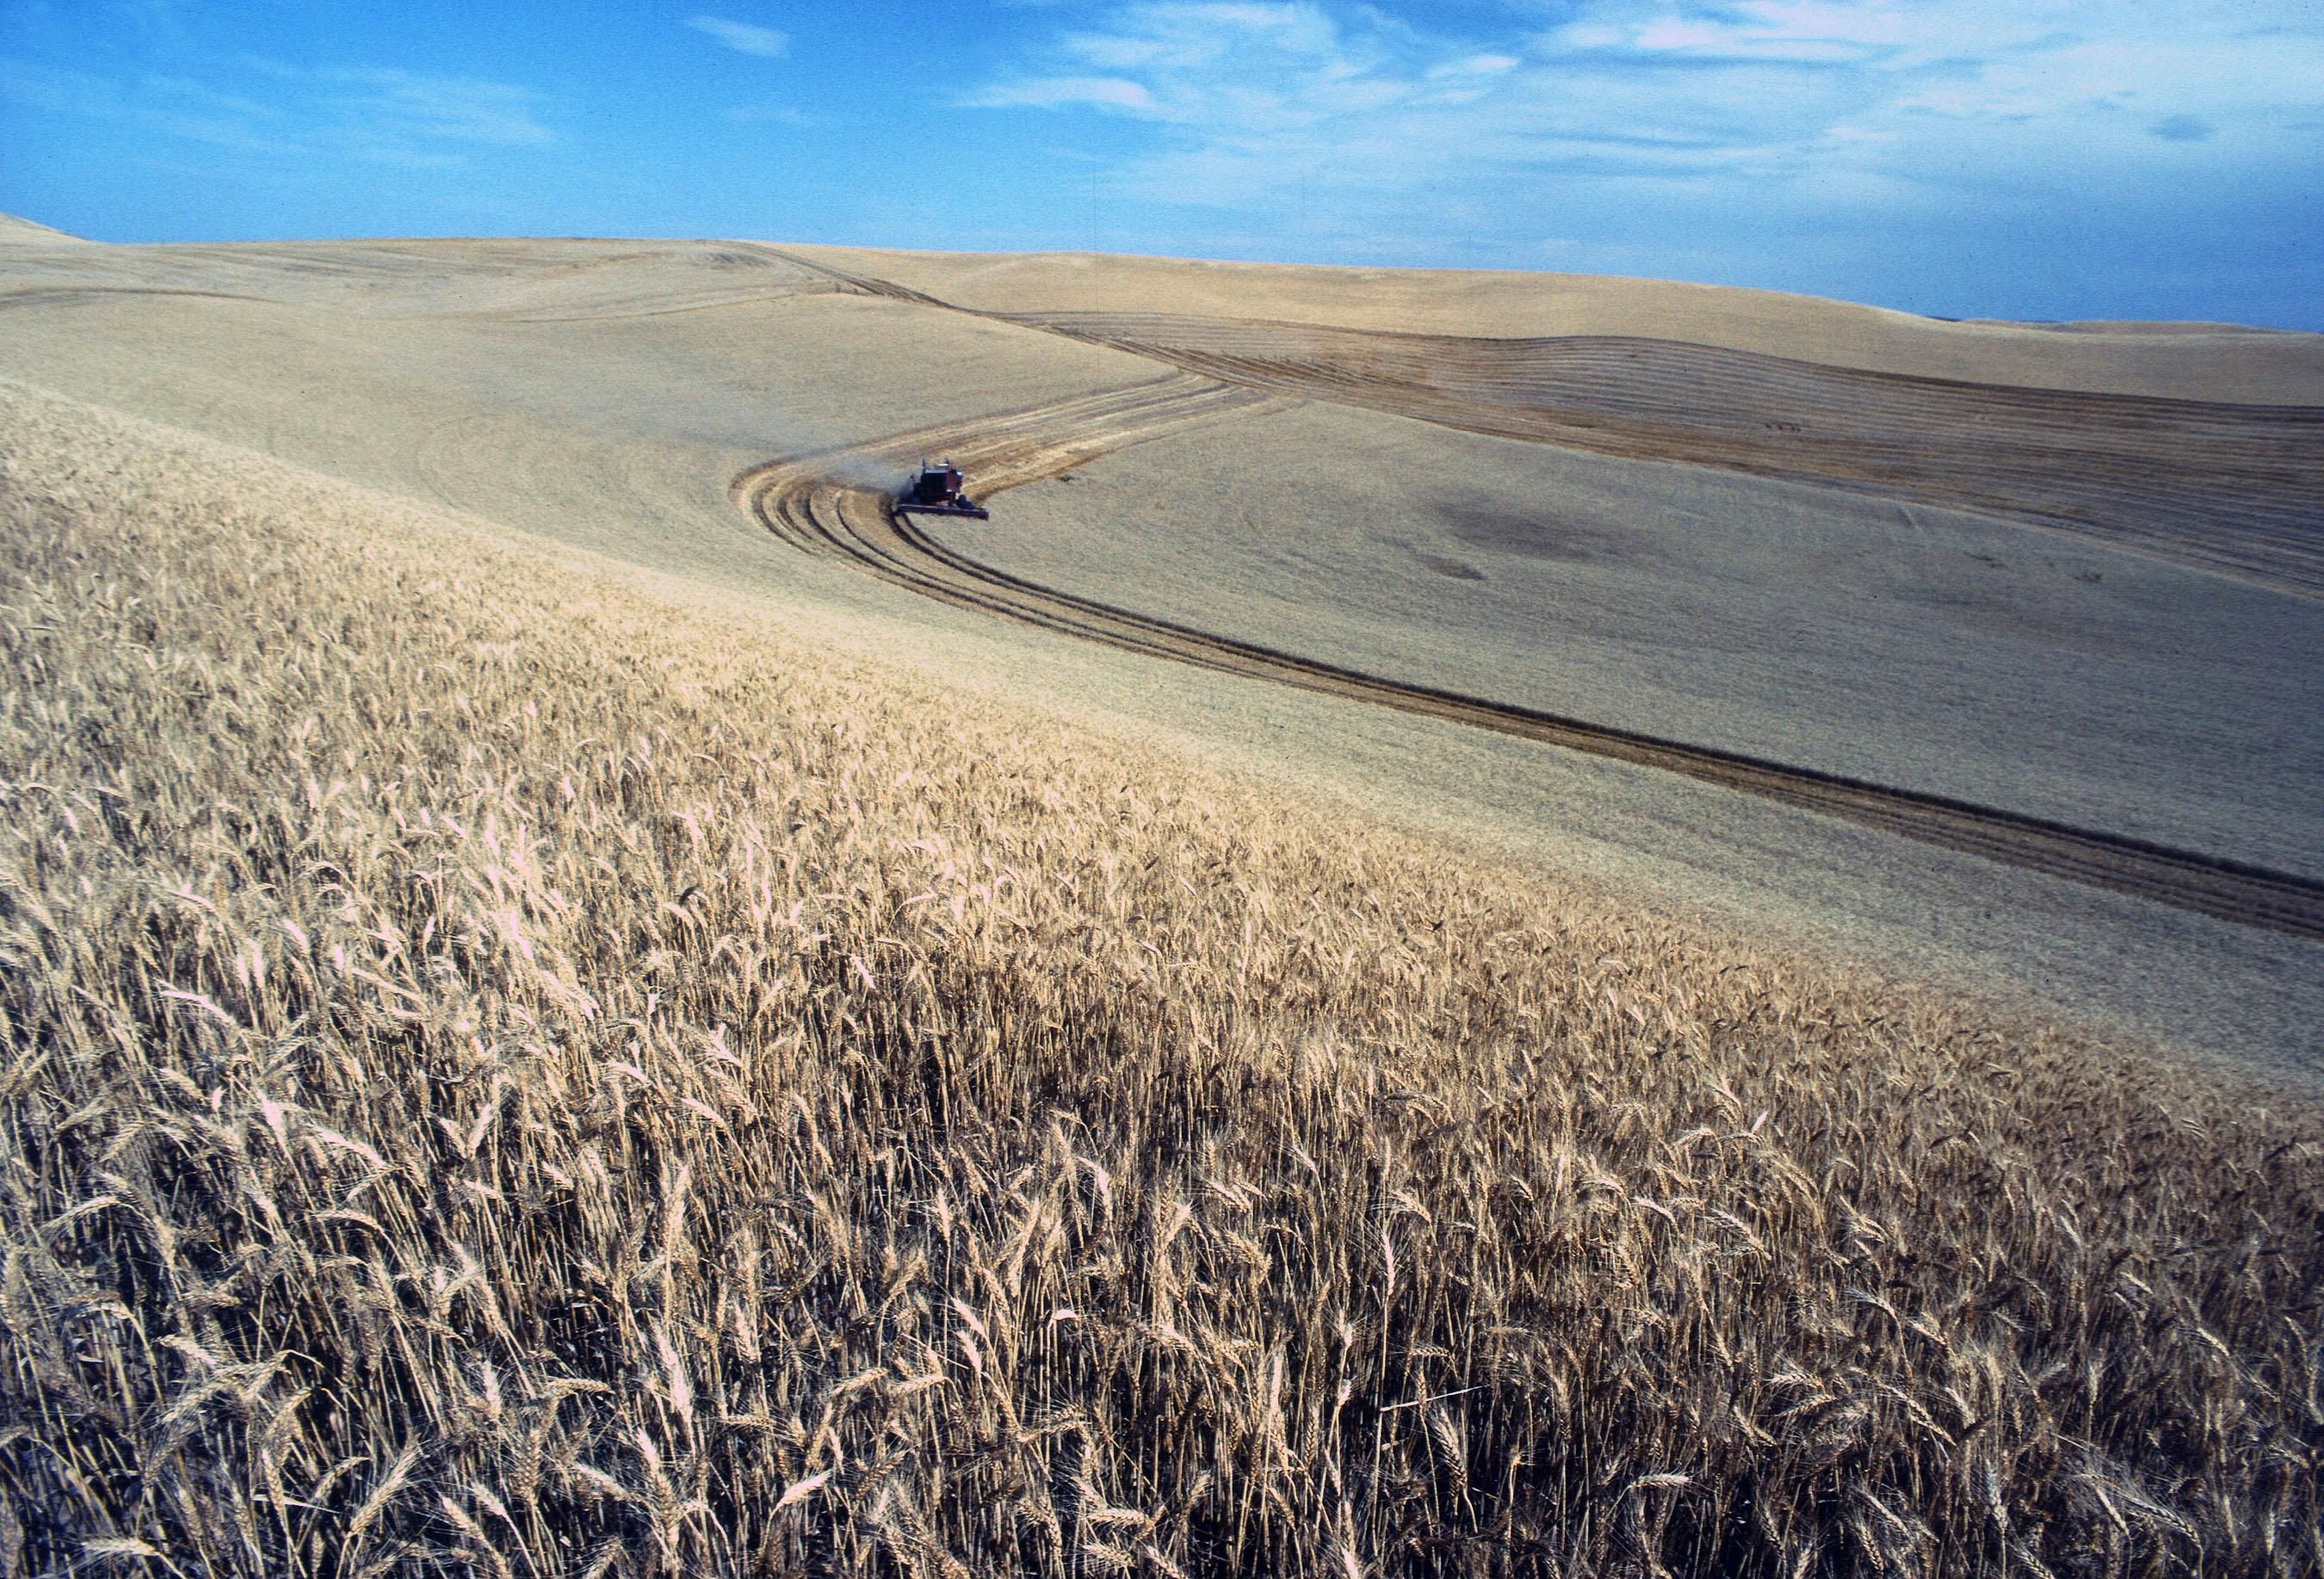 Photograph of a field of wheat with a combine harvester in the distance harvesting the wheat.